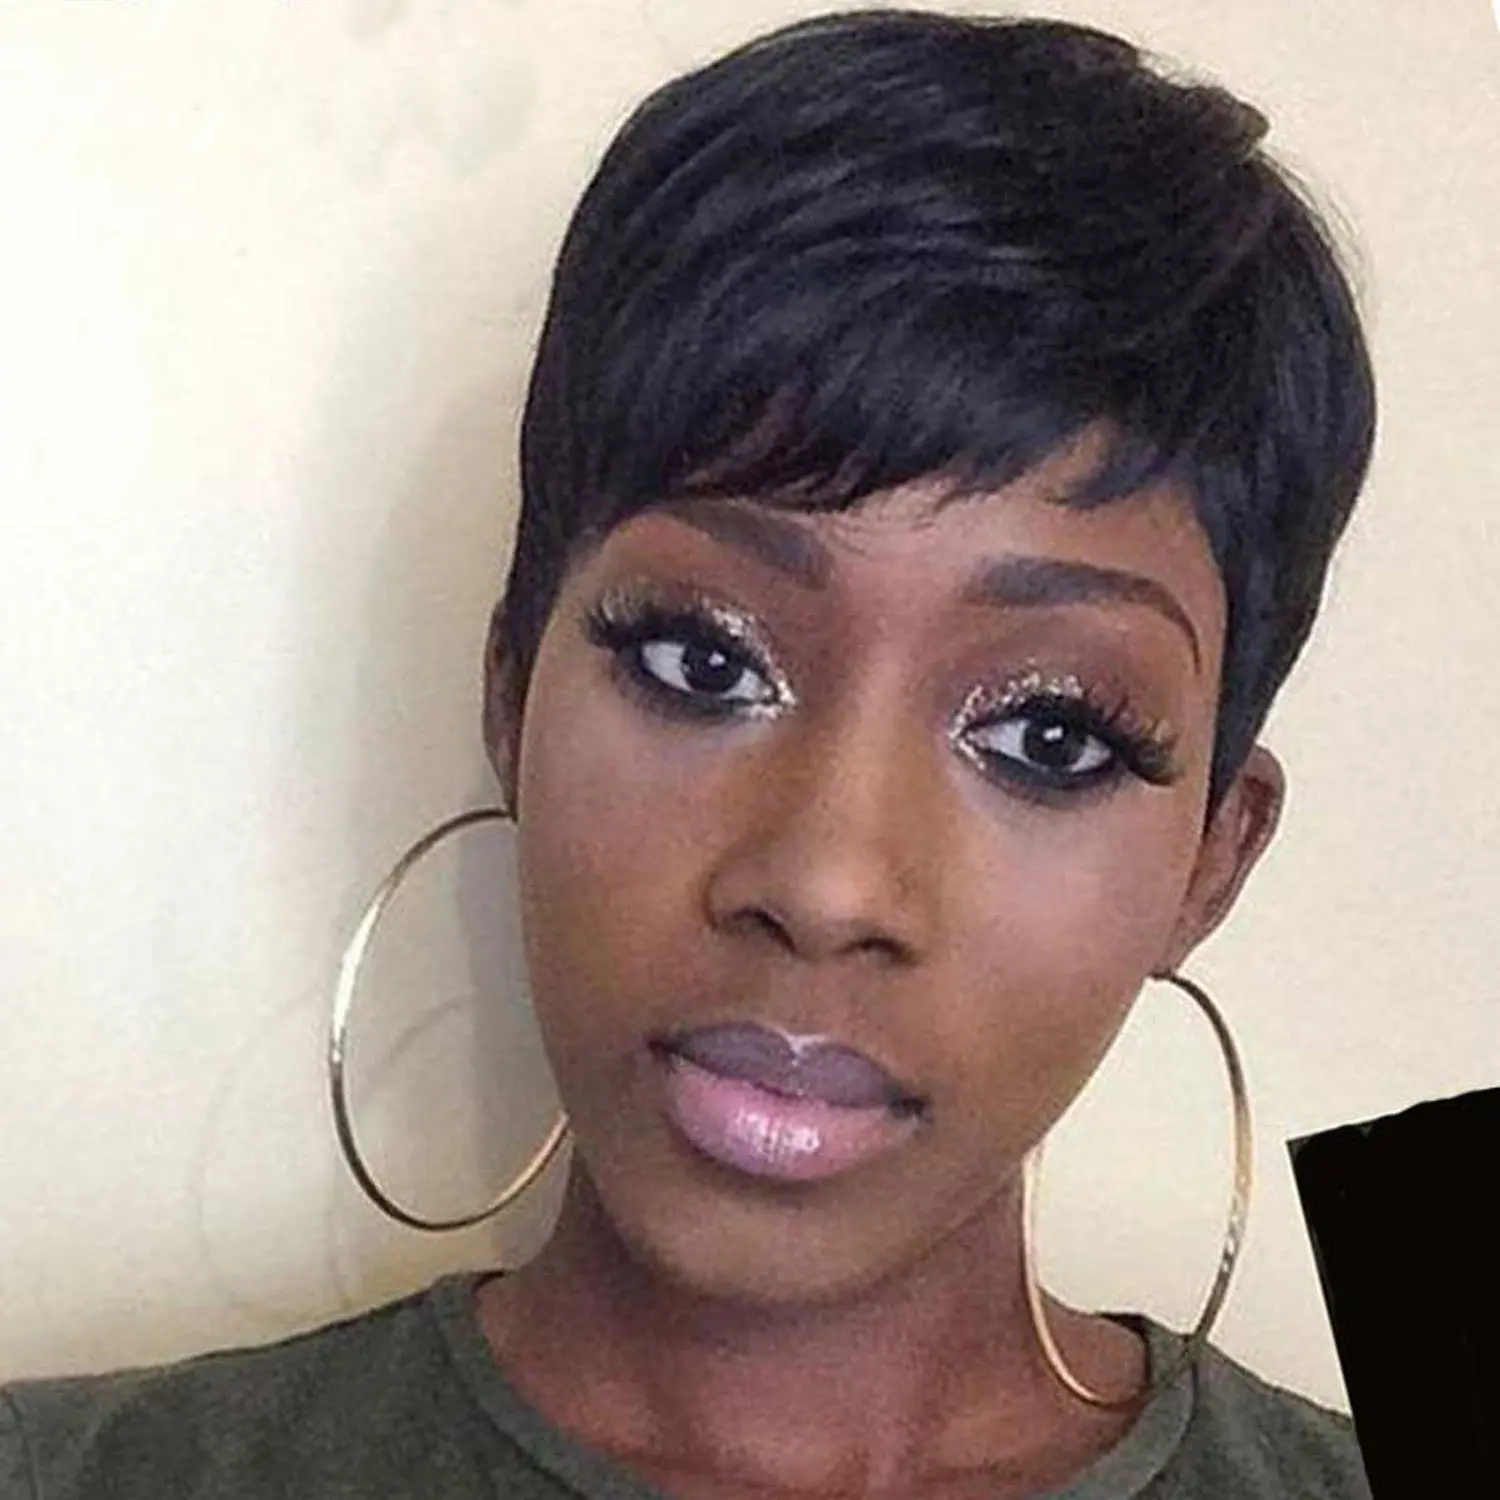 african american short style wigs